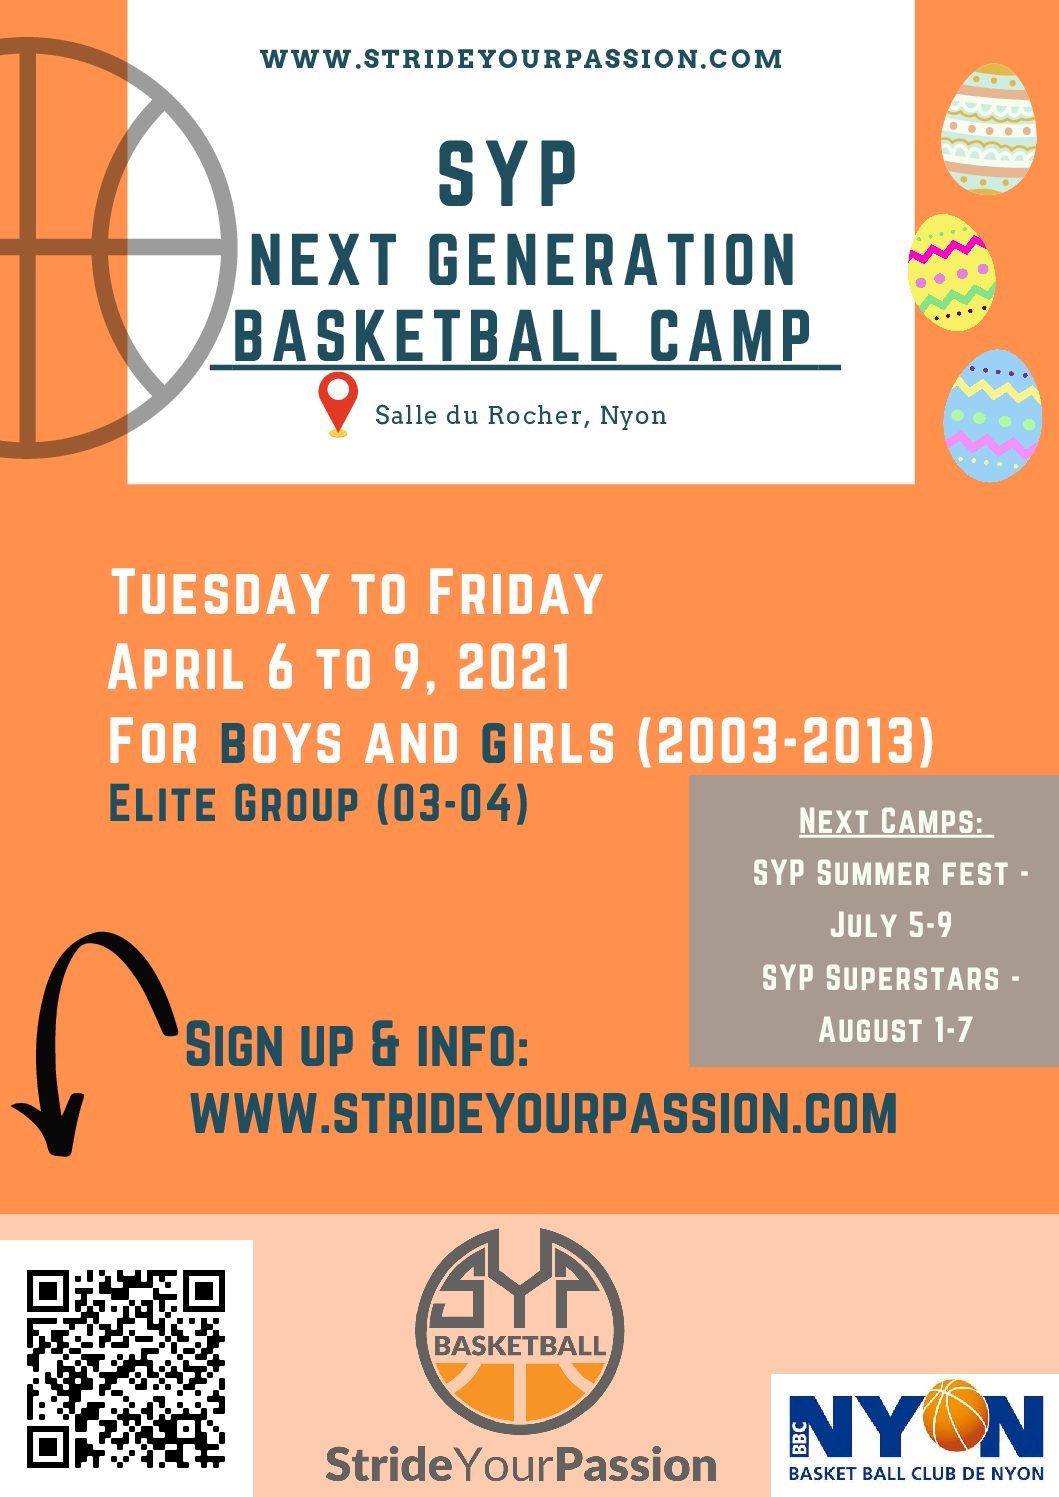 Camps Next generation Stride Your Passion